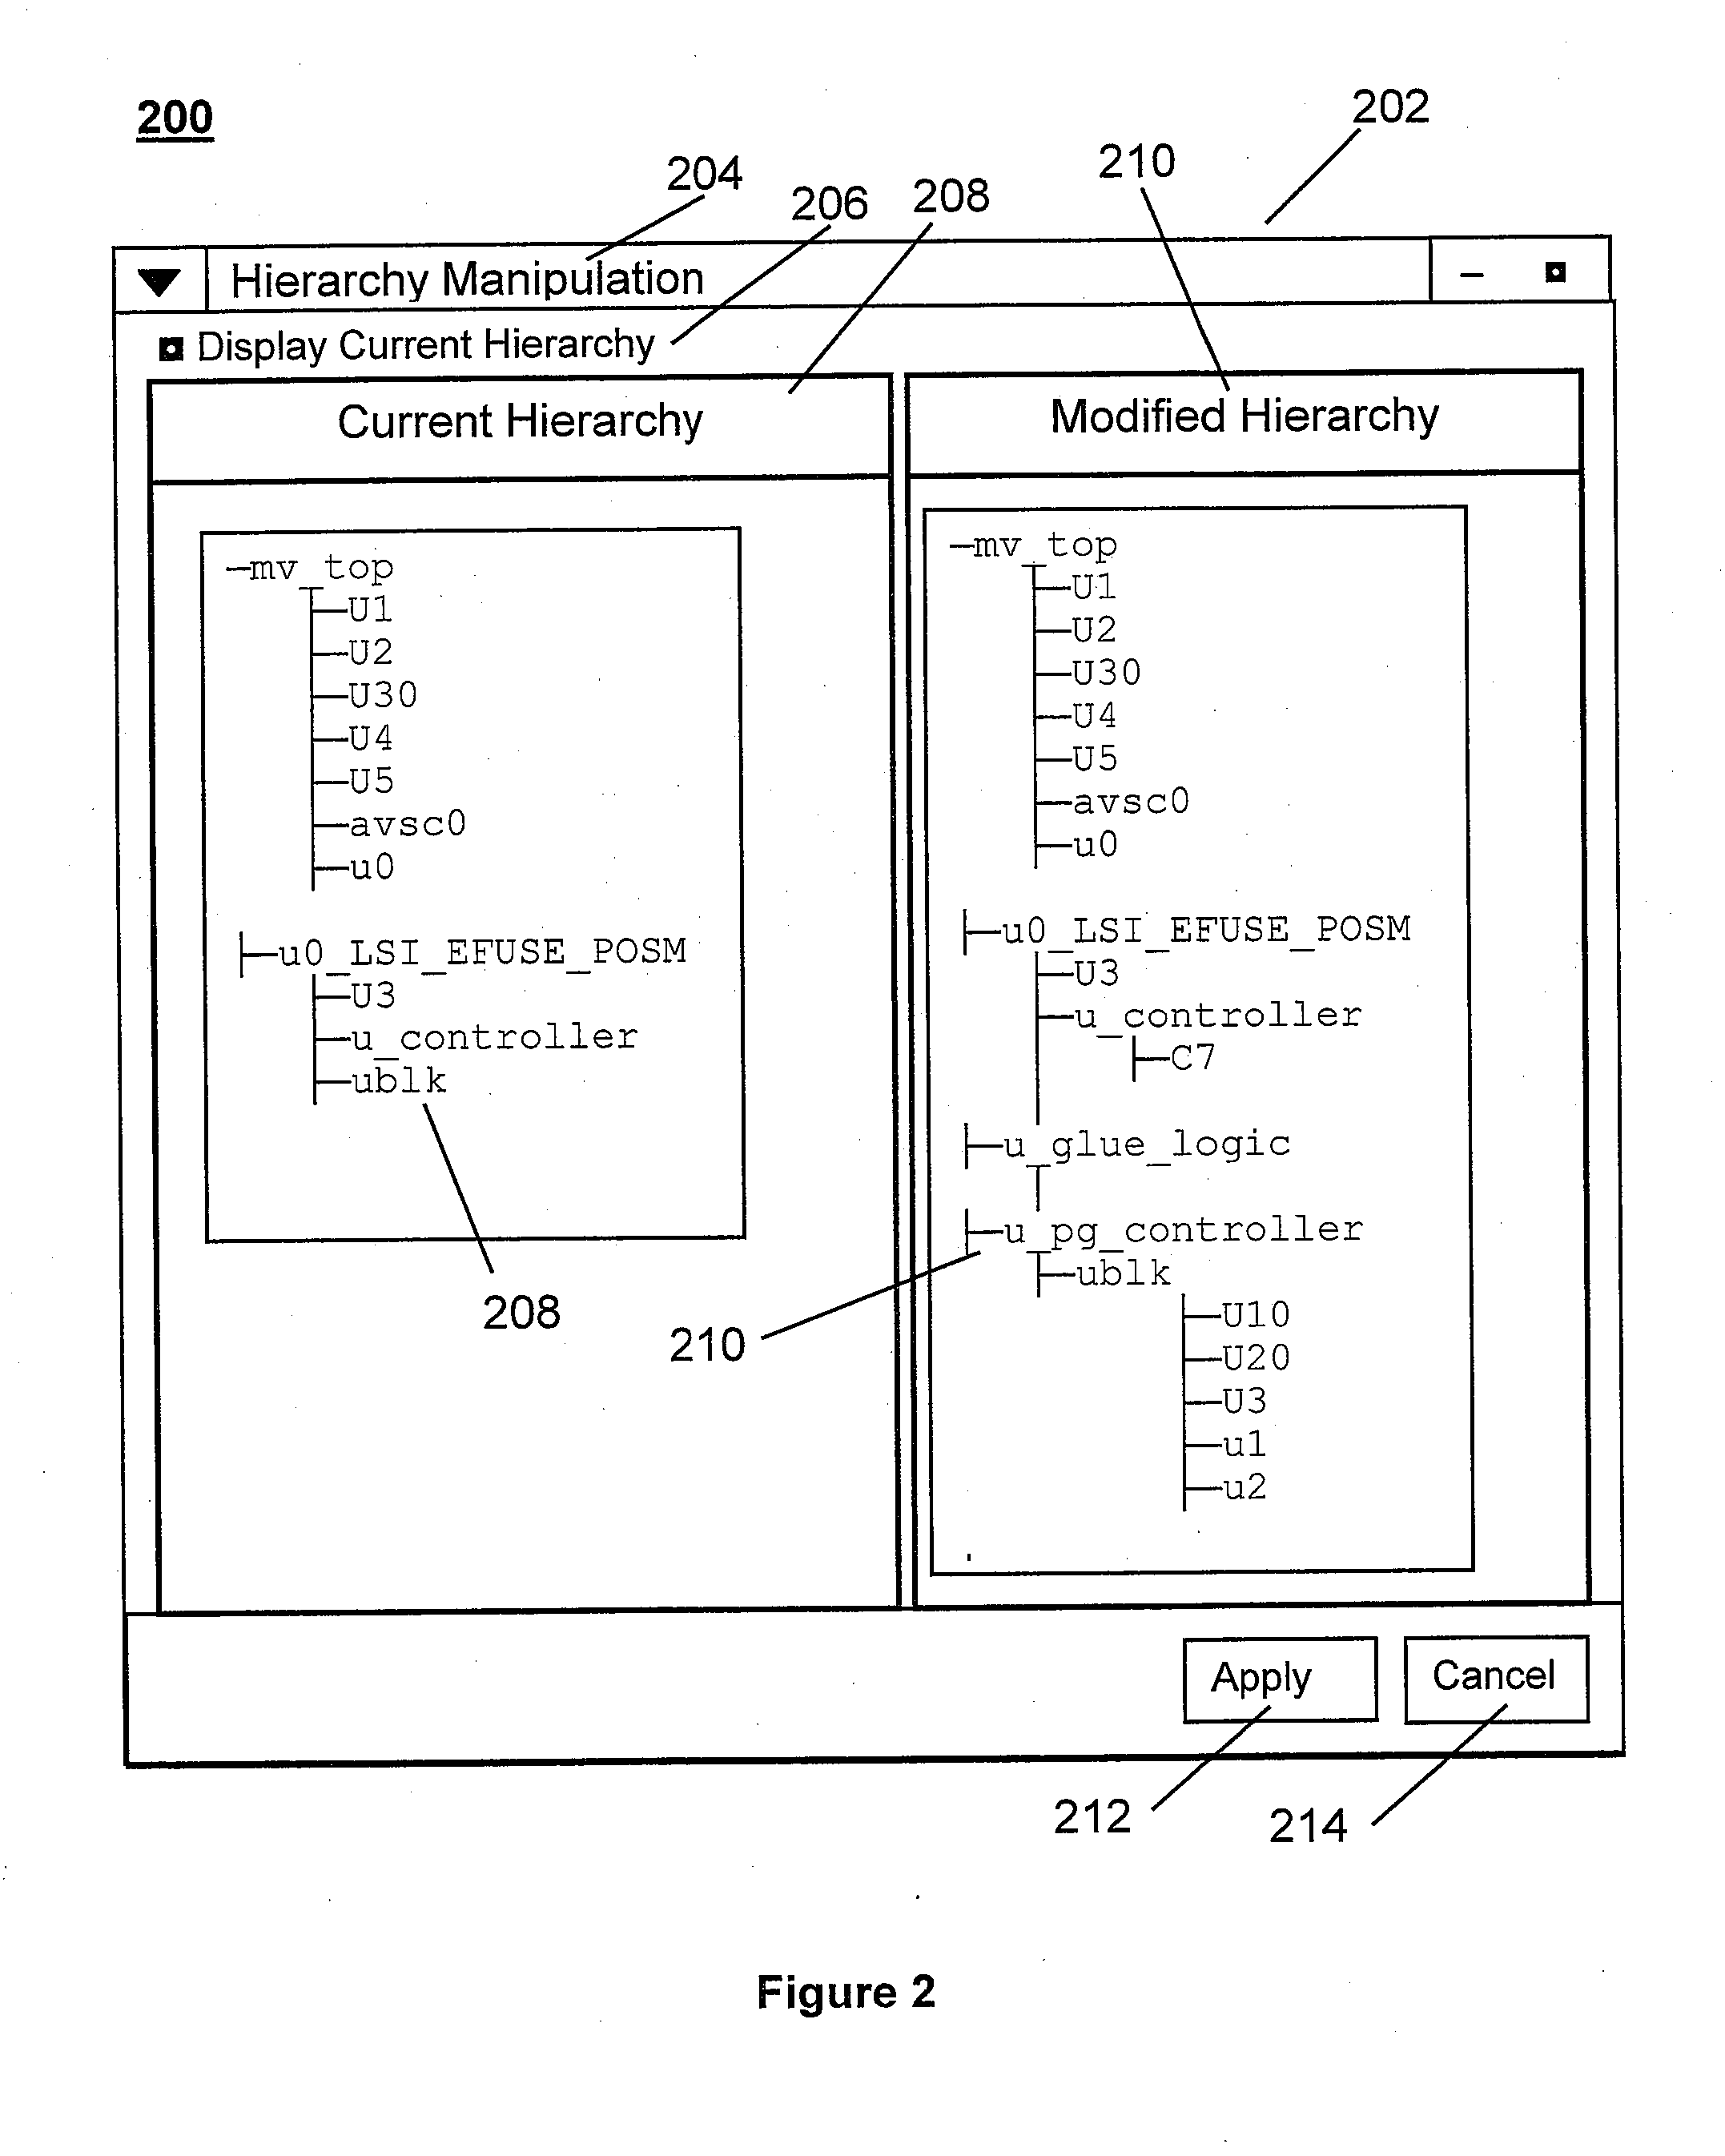 System and method for altering circuit design hierarchy to optimize routing and power distribution